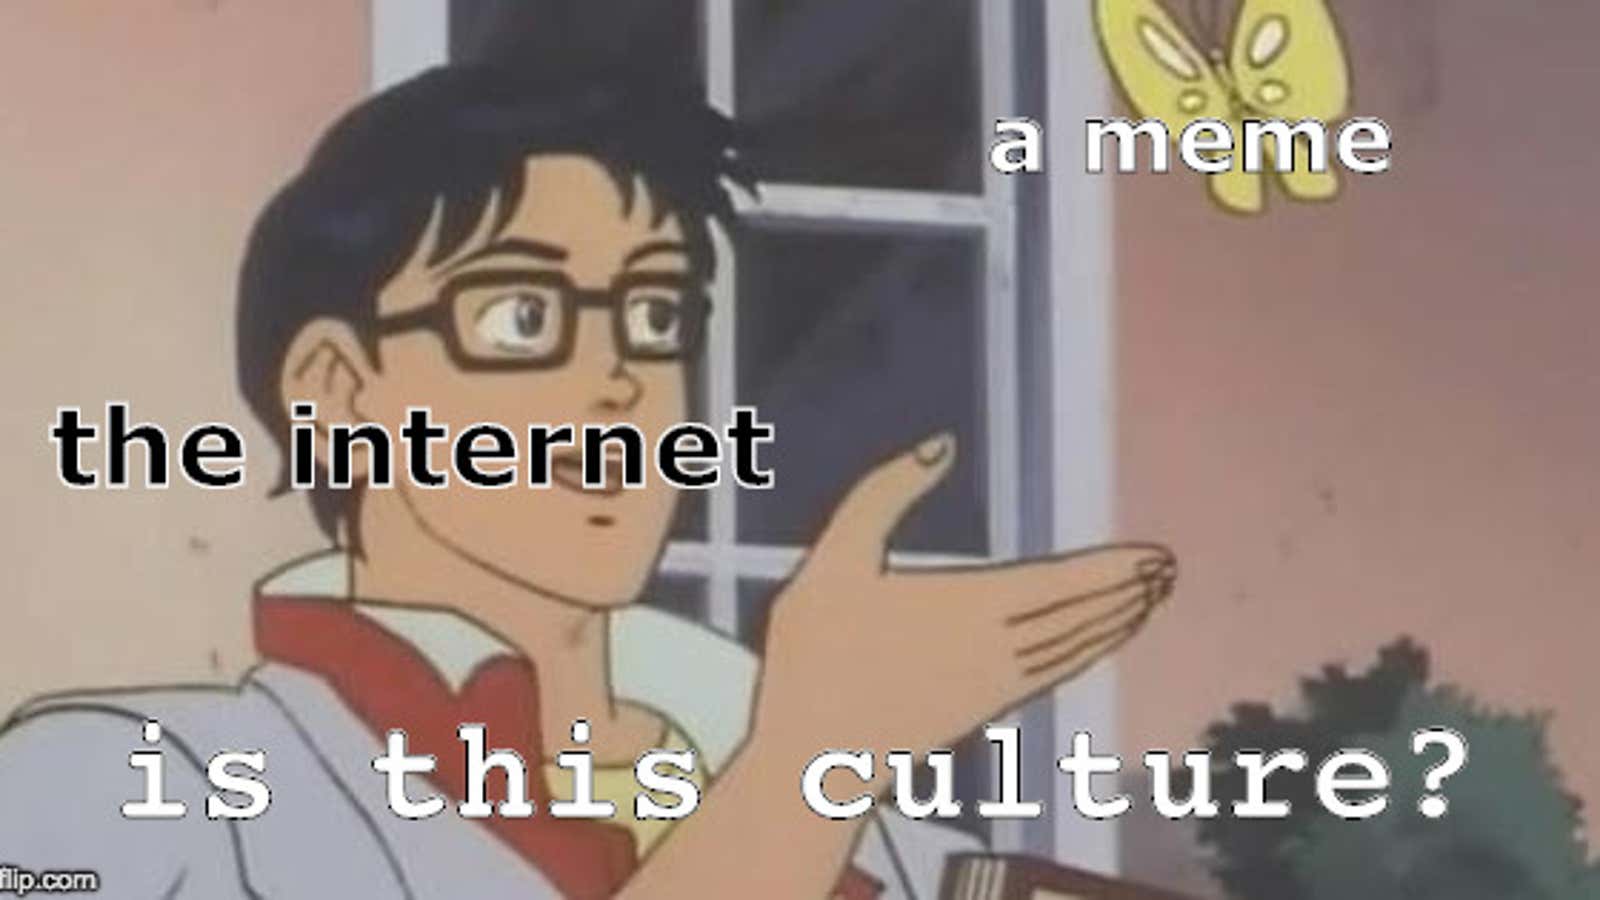 The world’s biggest meme is the word “meme” itself